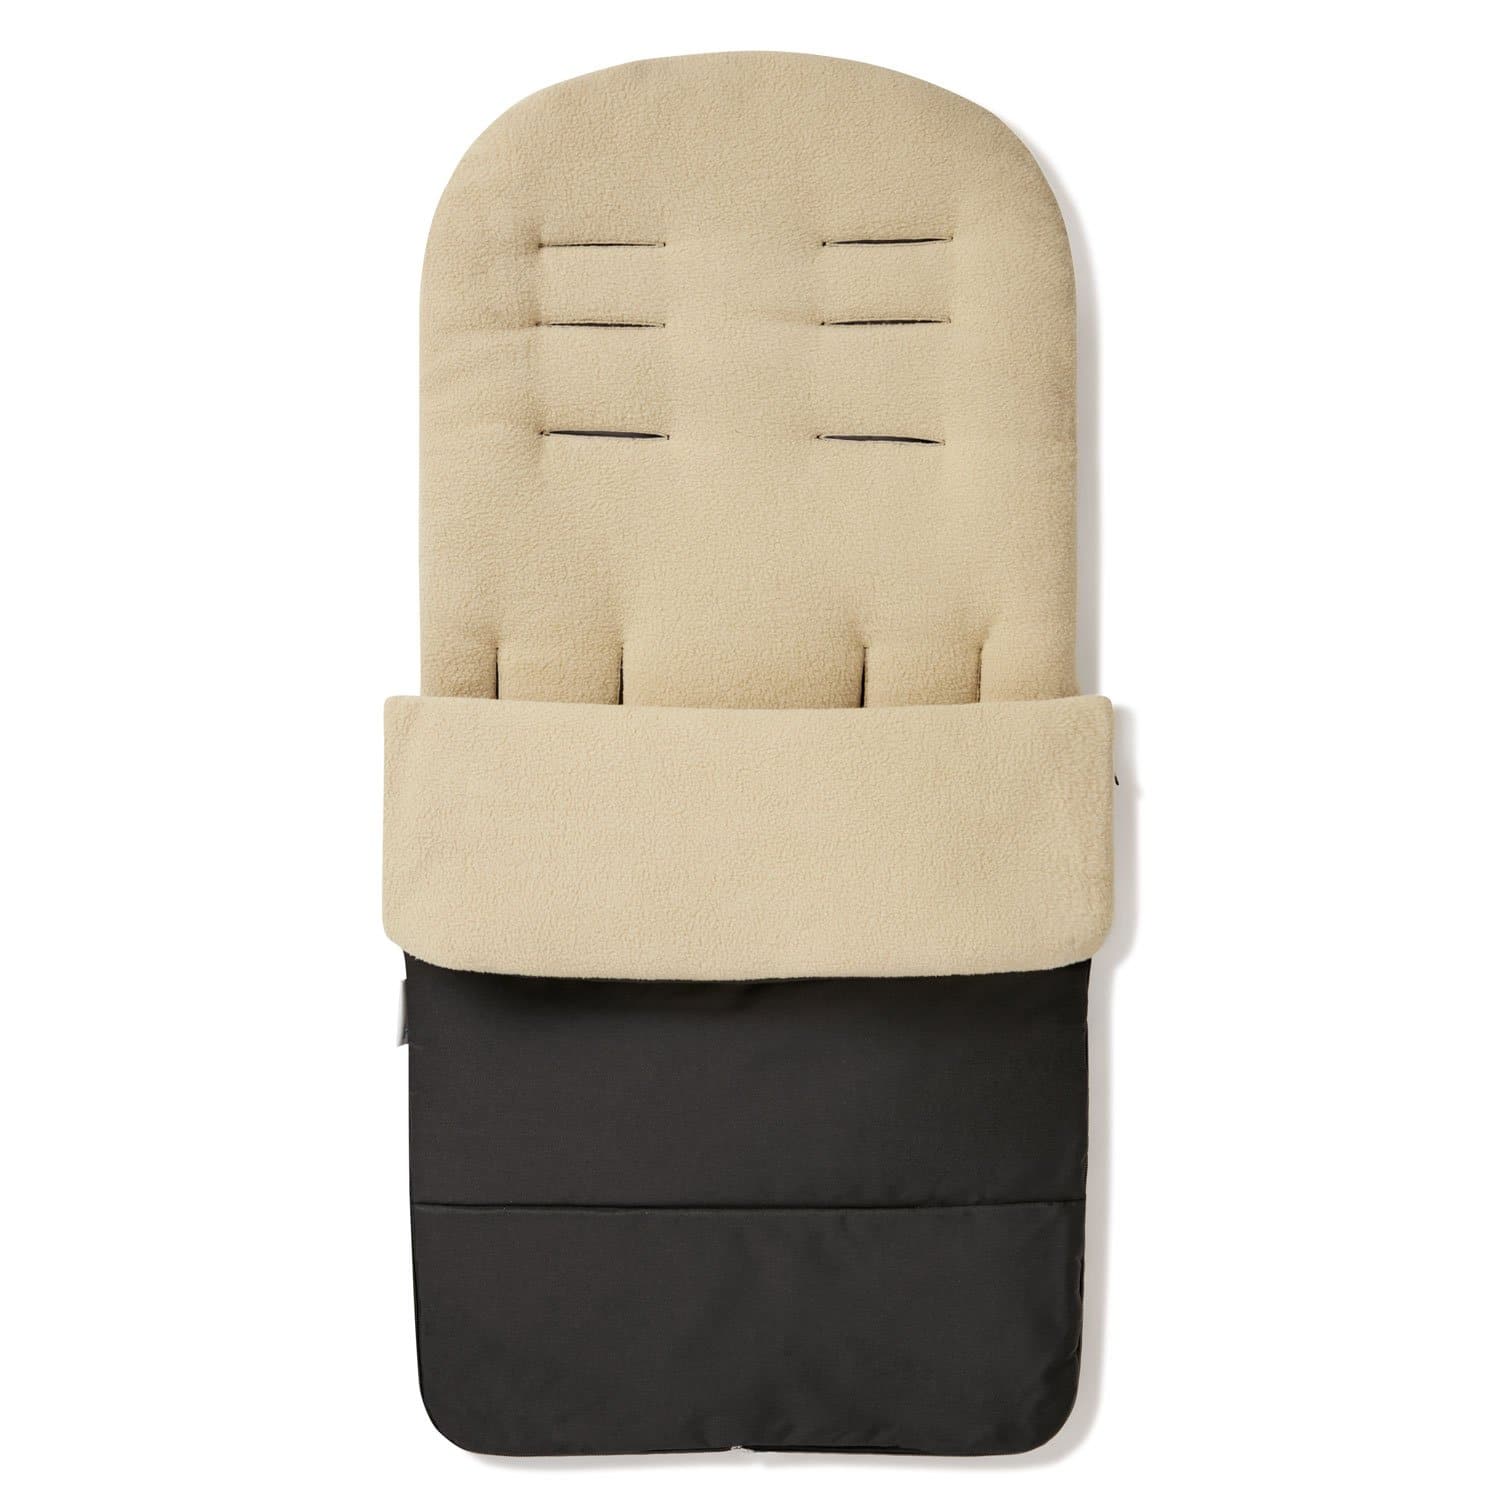 Premium Footmuff / Cosy Toes Compatible with Cybex - Desert Sand / Fits All Models | For Your Little One